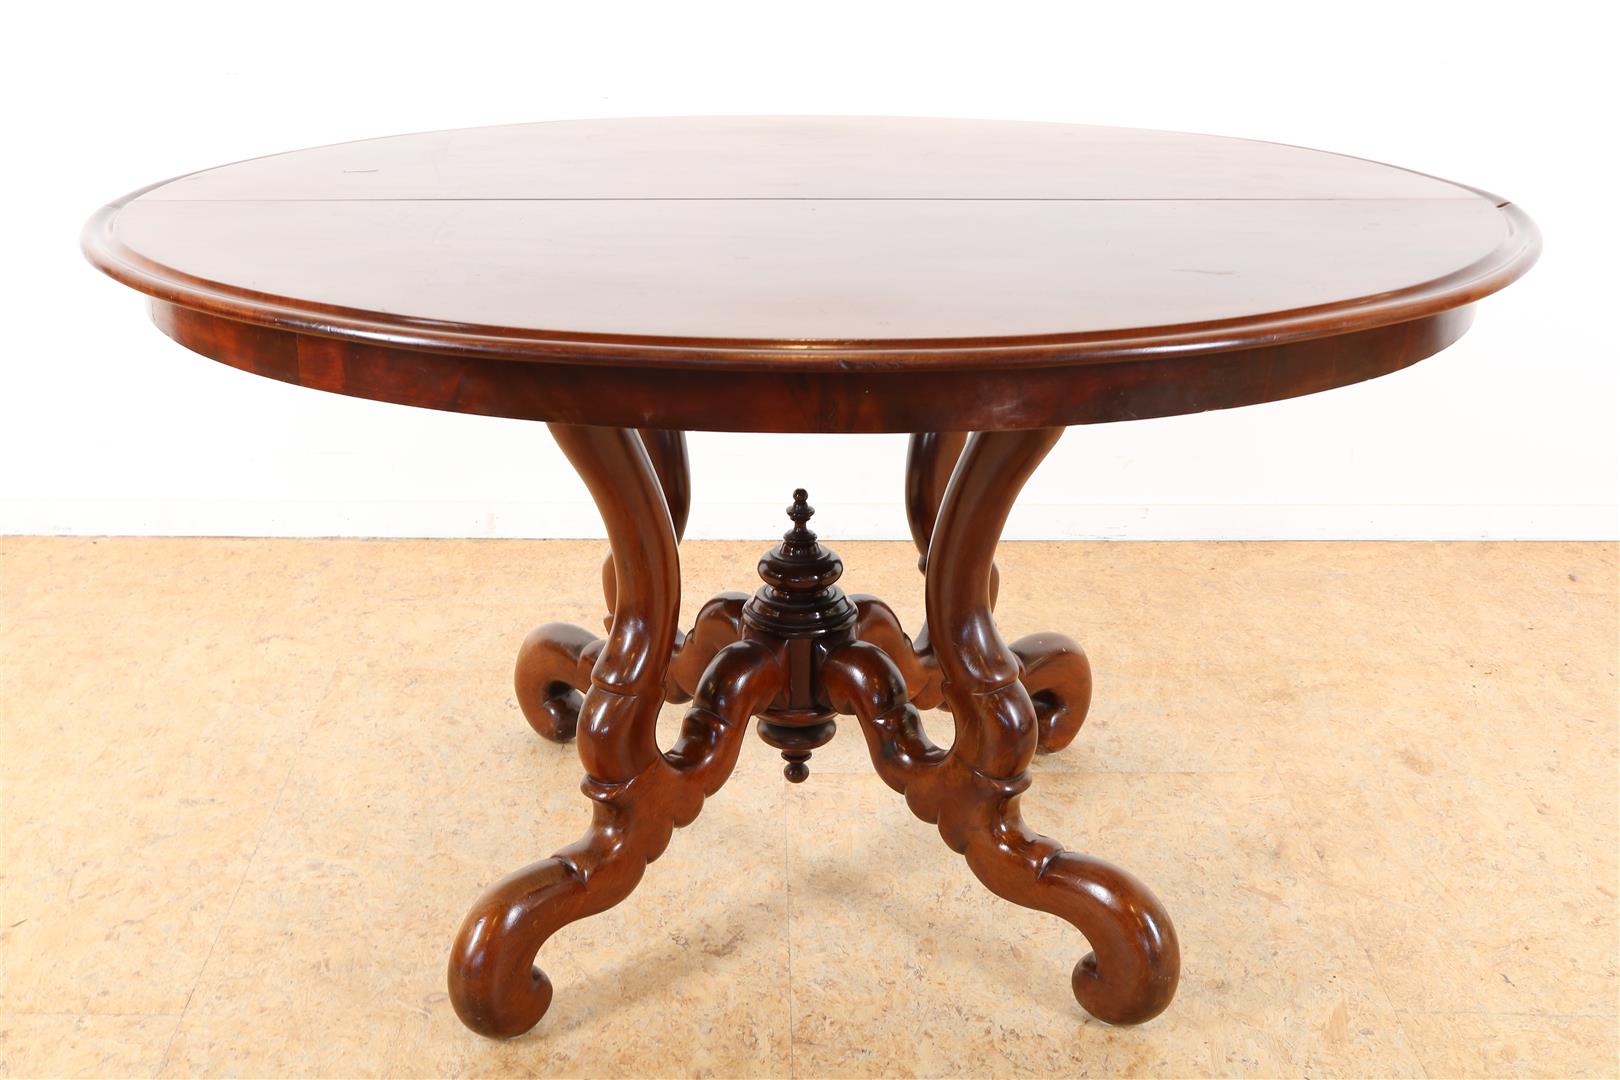 Mahogany Biedermeier coulisse table on spider head leg, 19 century, 74 x 135 x 108 cm, with - Image 2 of 7